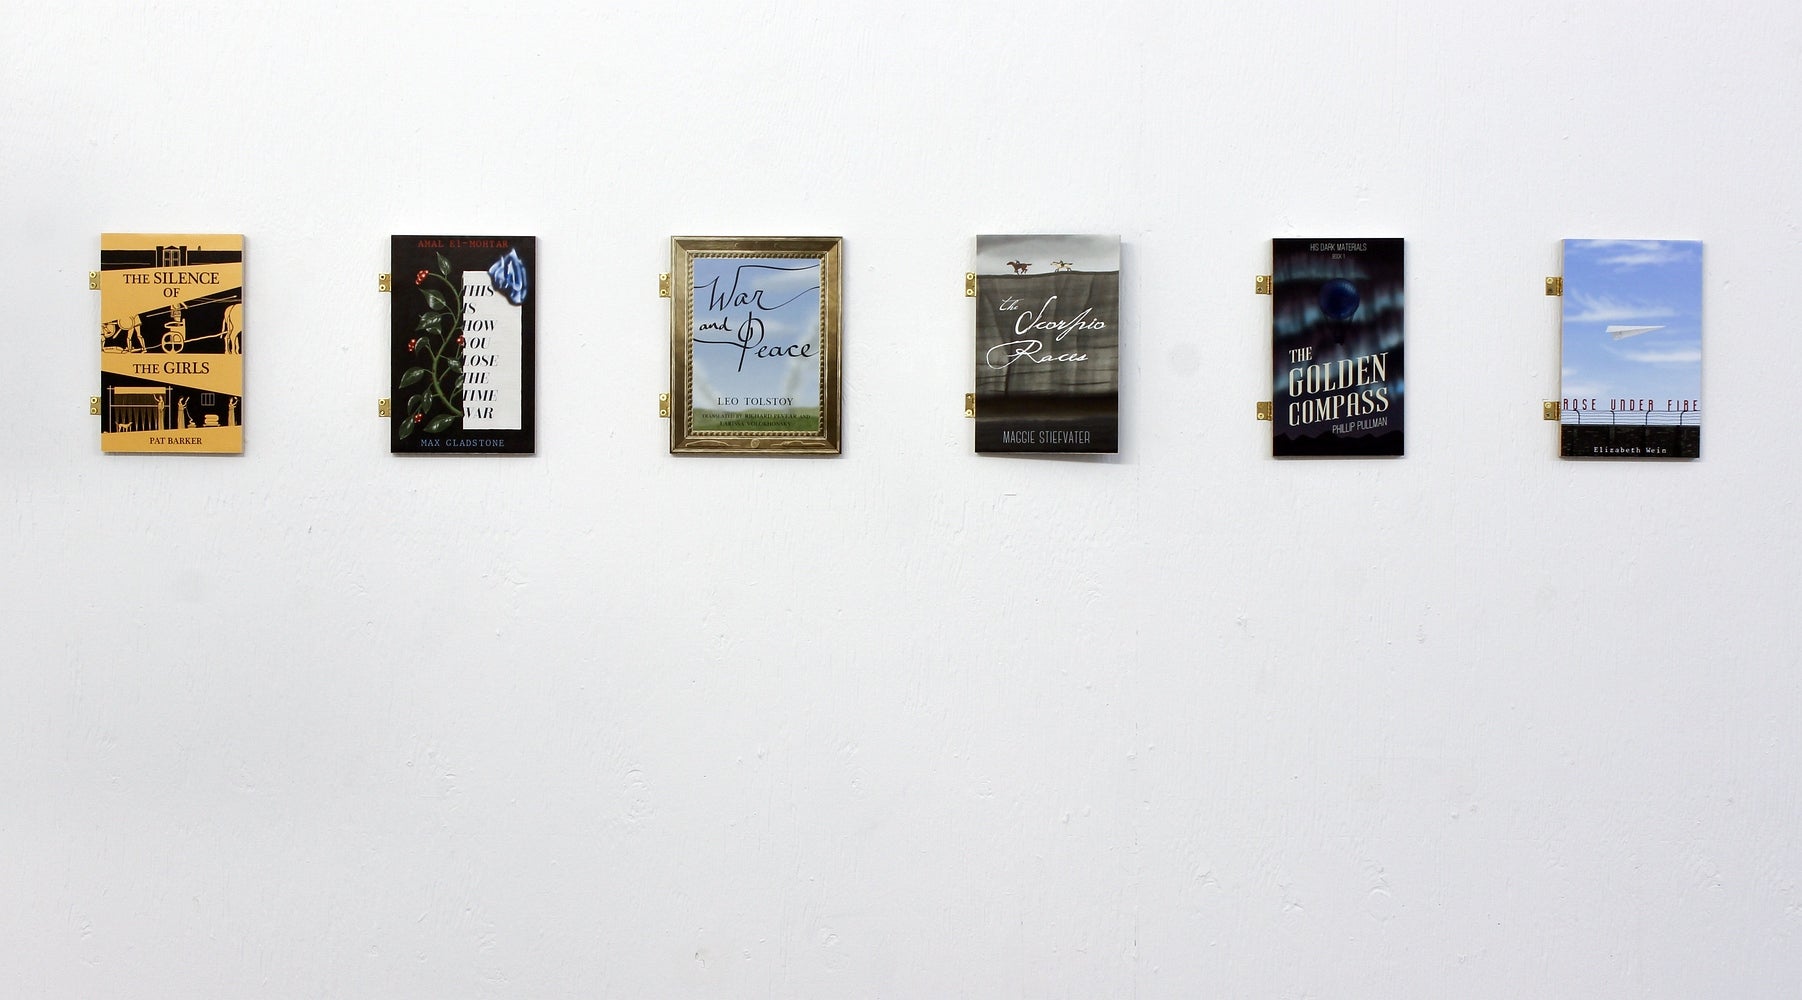 Art installation of 6 book covers attached to the wall with hinges.